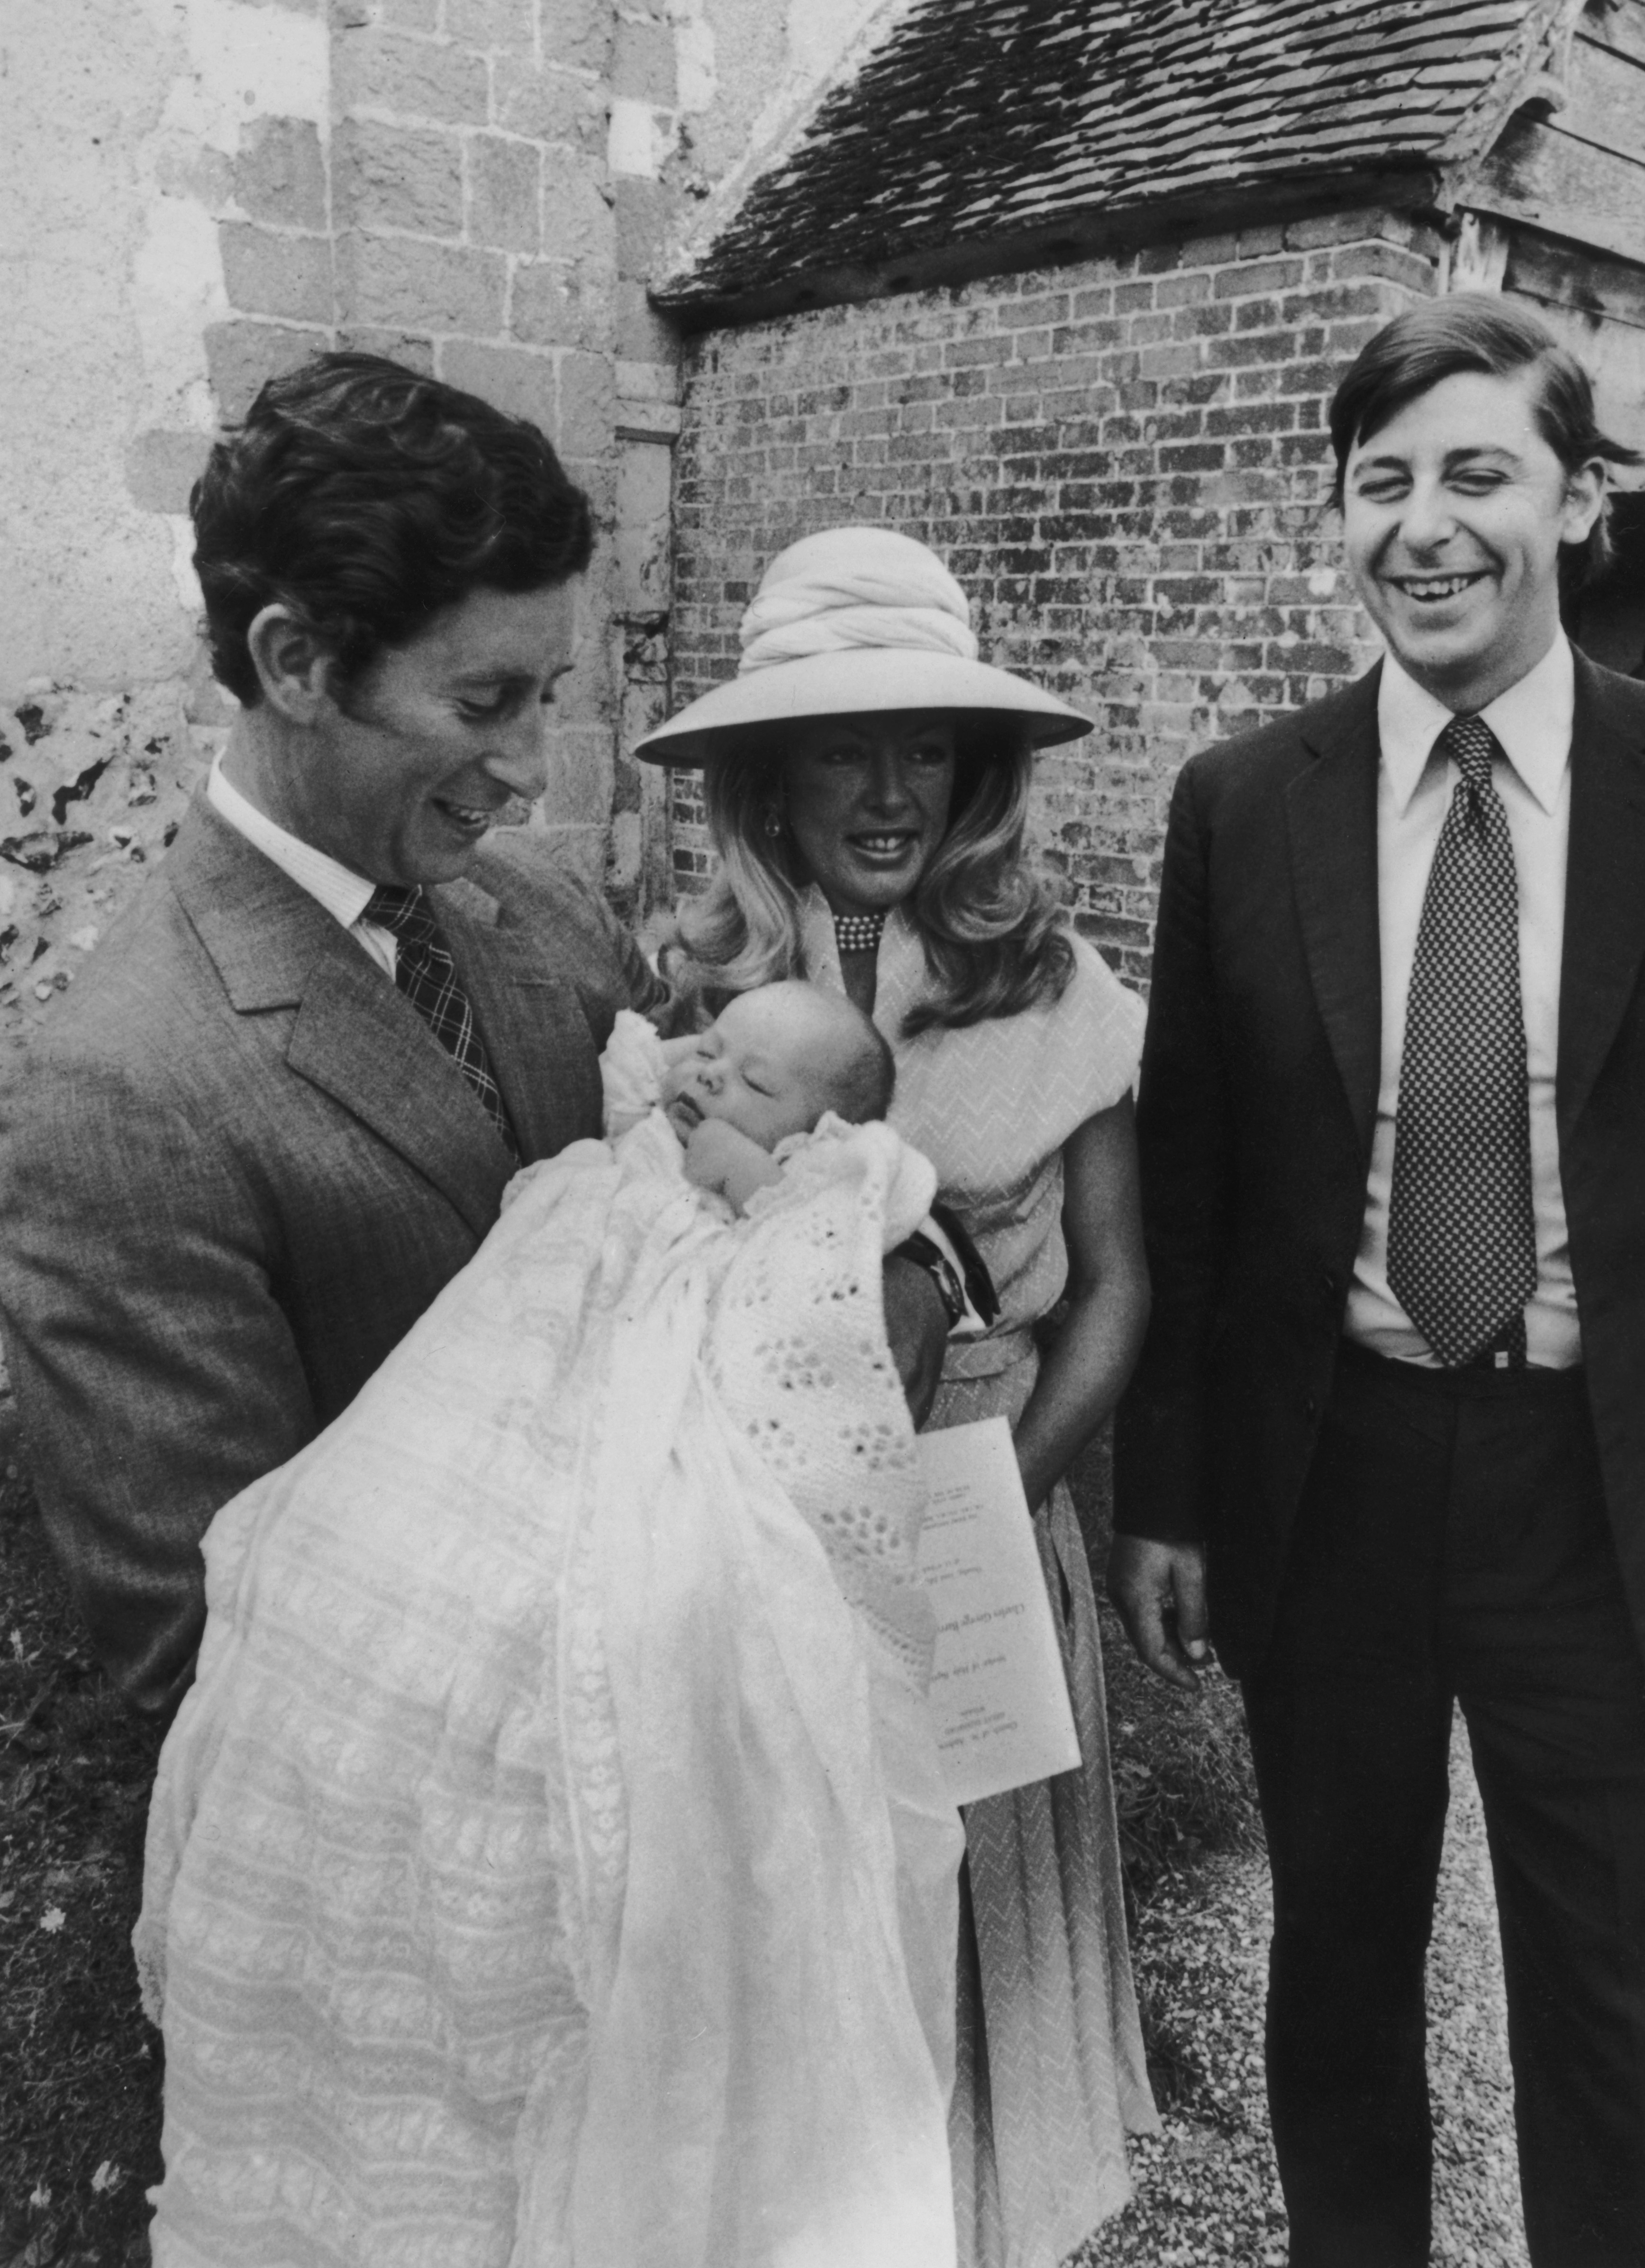 Prince Charles with Lady Dale Tryon, Lord Anthony George Merrick Tryon, and their son, Charles, during his baptism on July 23, 1976 at the Church of St Andrews, Durnford, Wiltshire | Source: Getty Images